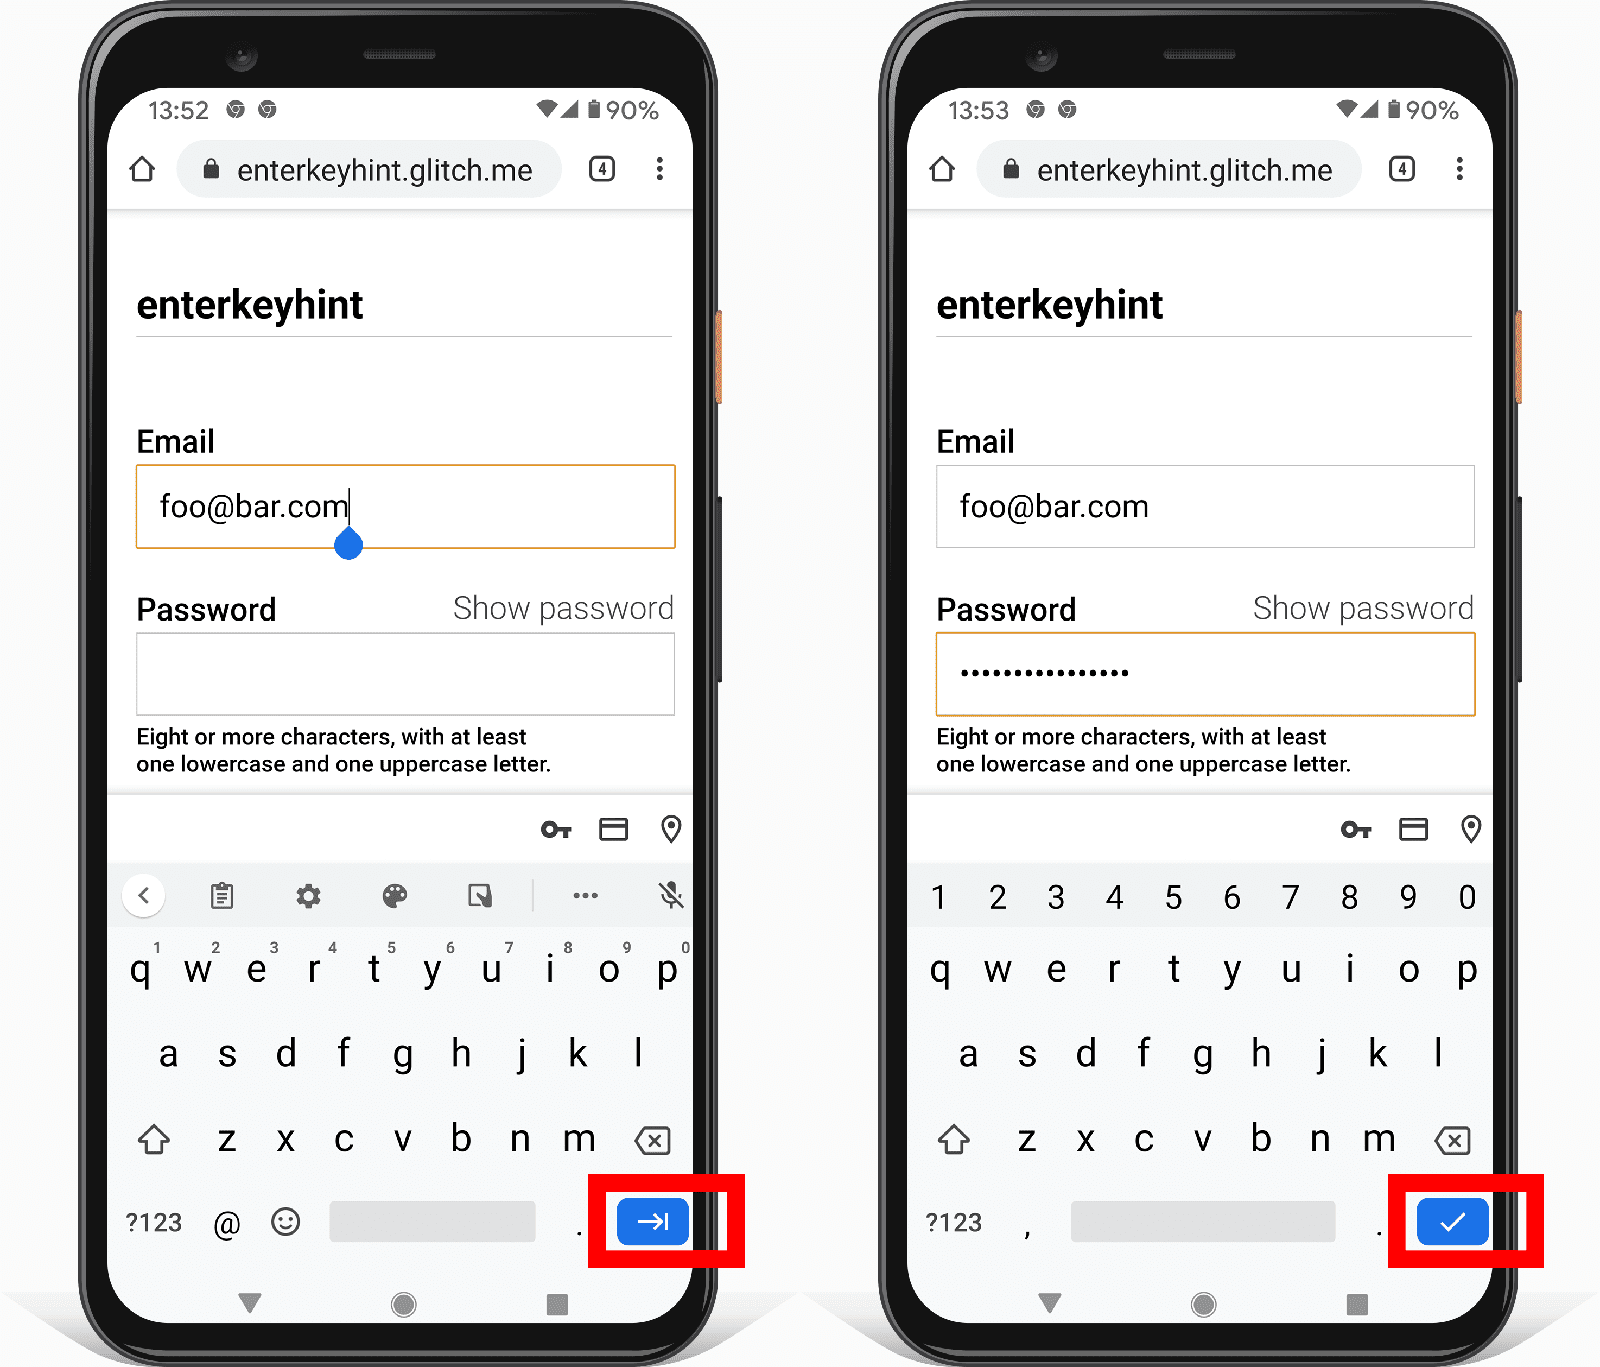 Two screenshots of a form on Android showing how the enterkeyhint input attribute changes the enter key button icon.